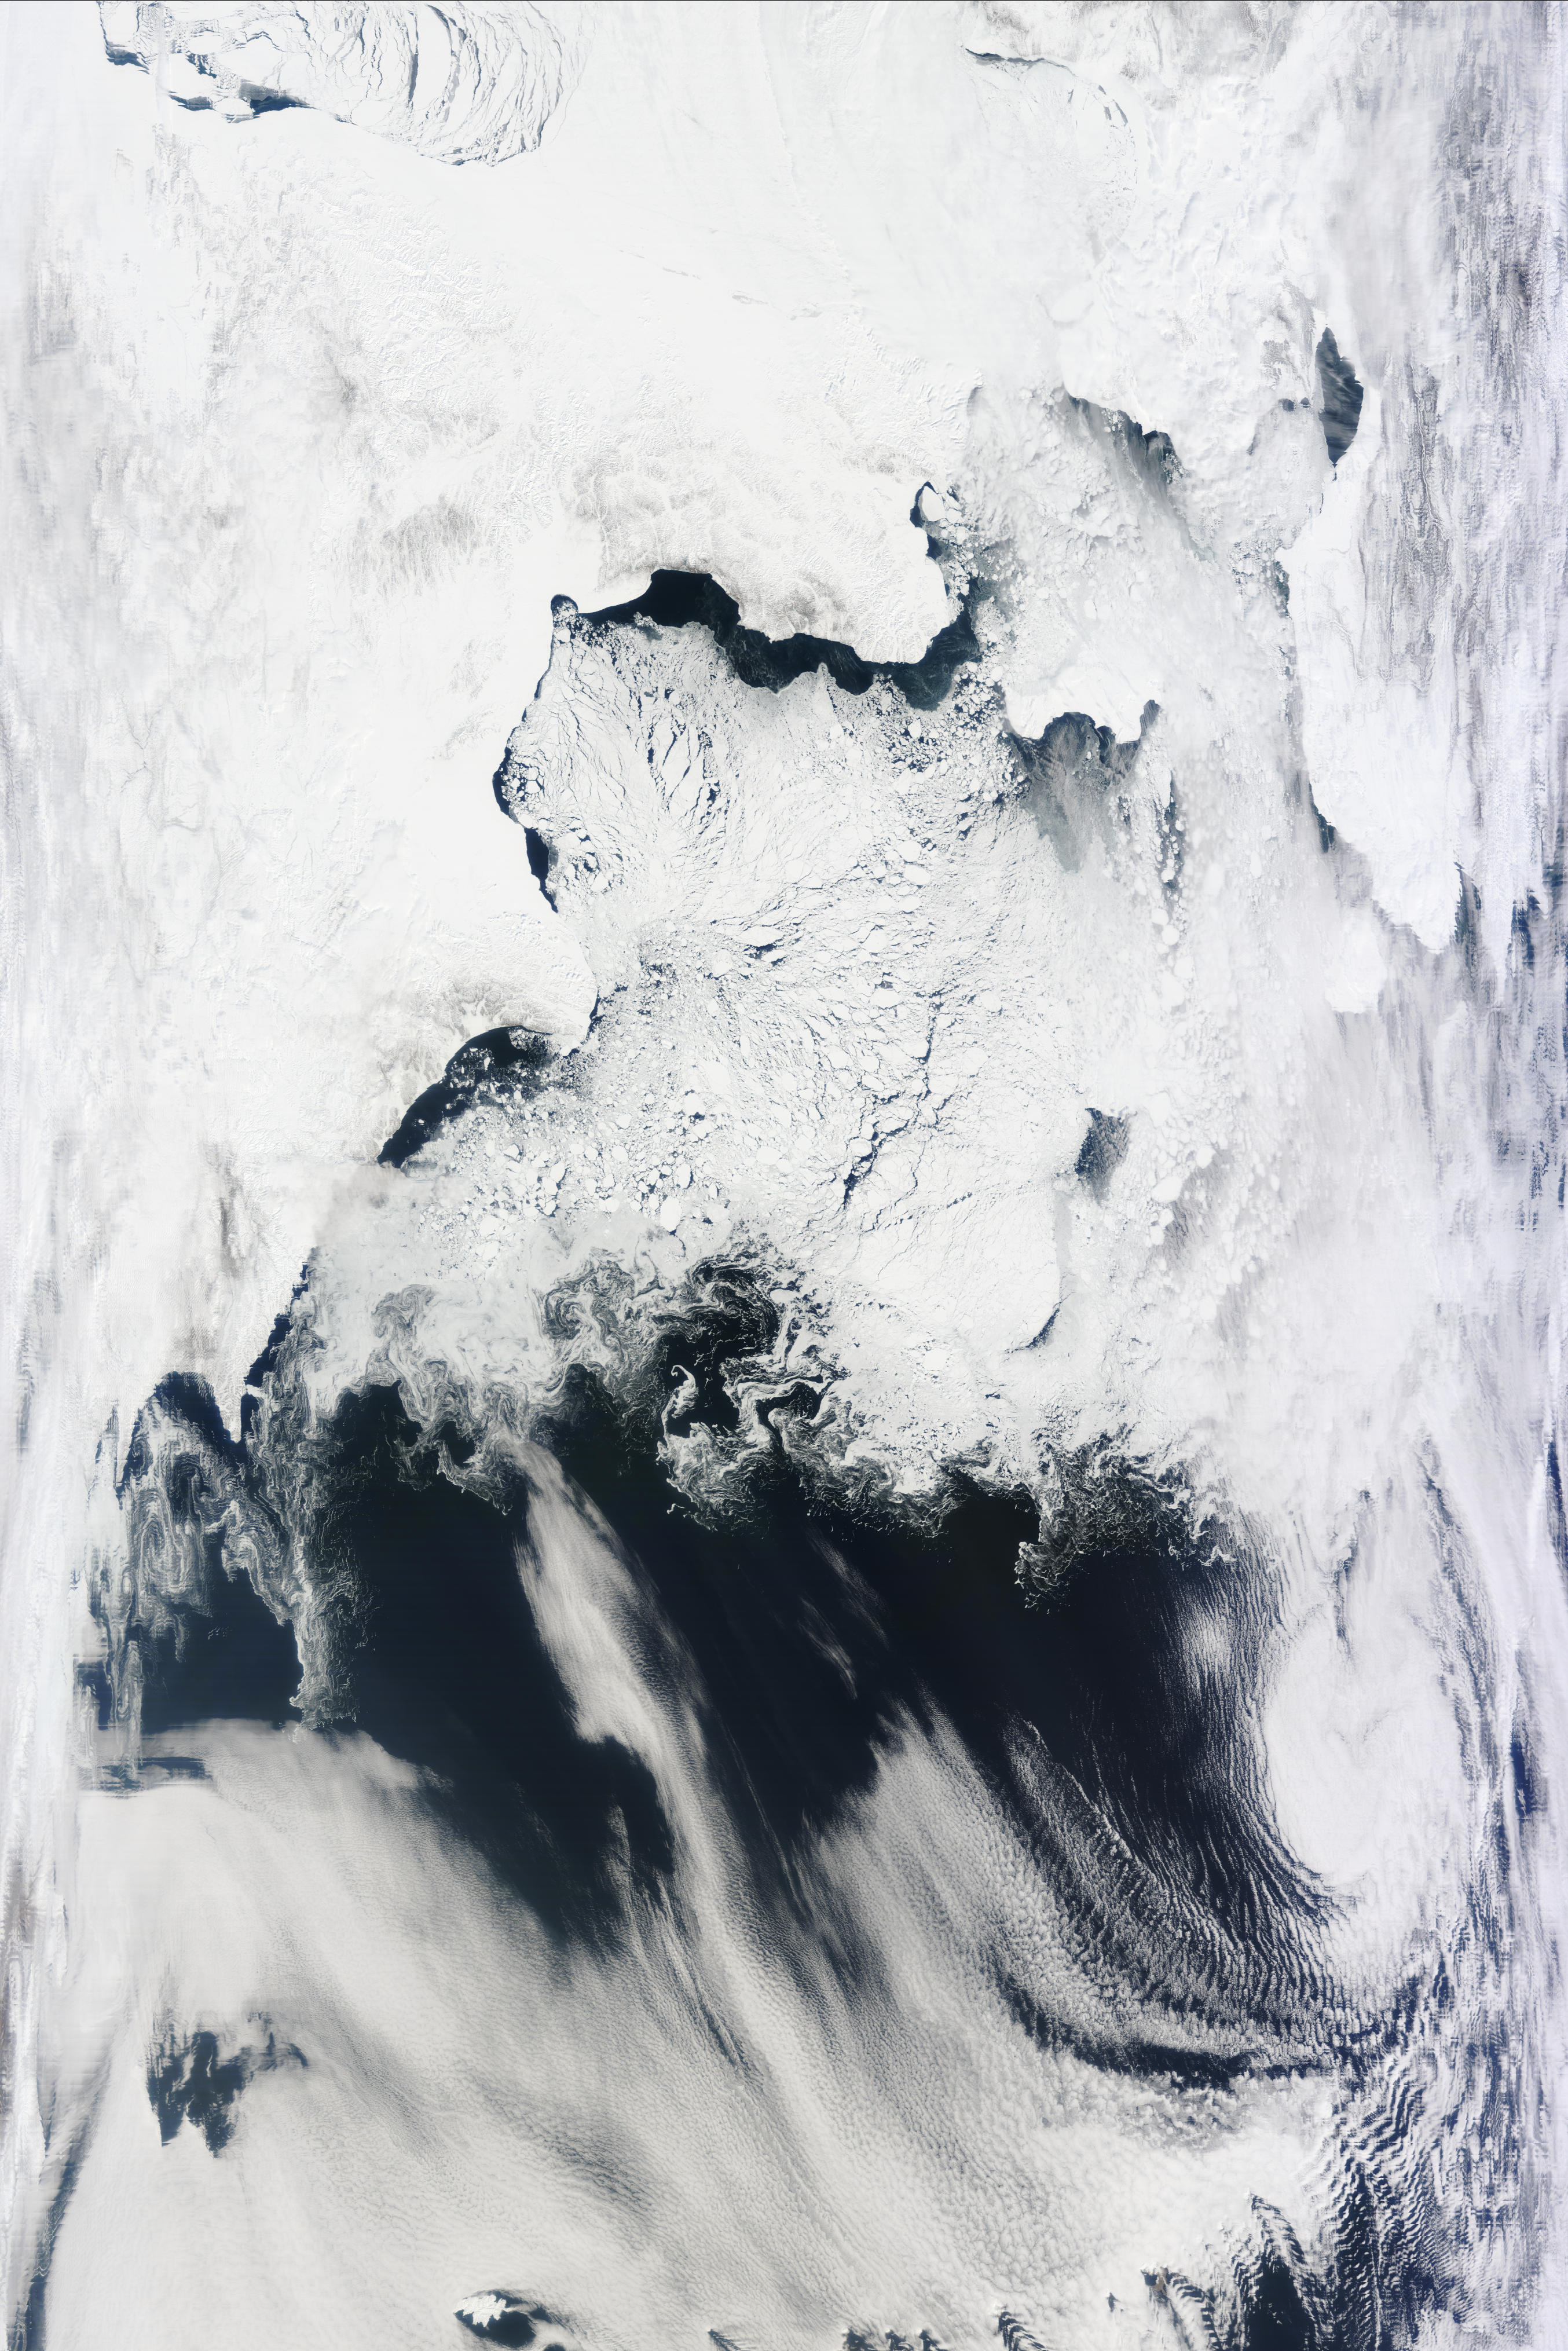 Bering Sea (Bering Straight and St. Lawrence Island in top-right quadrant)